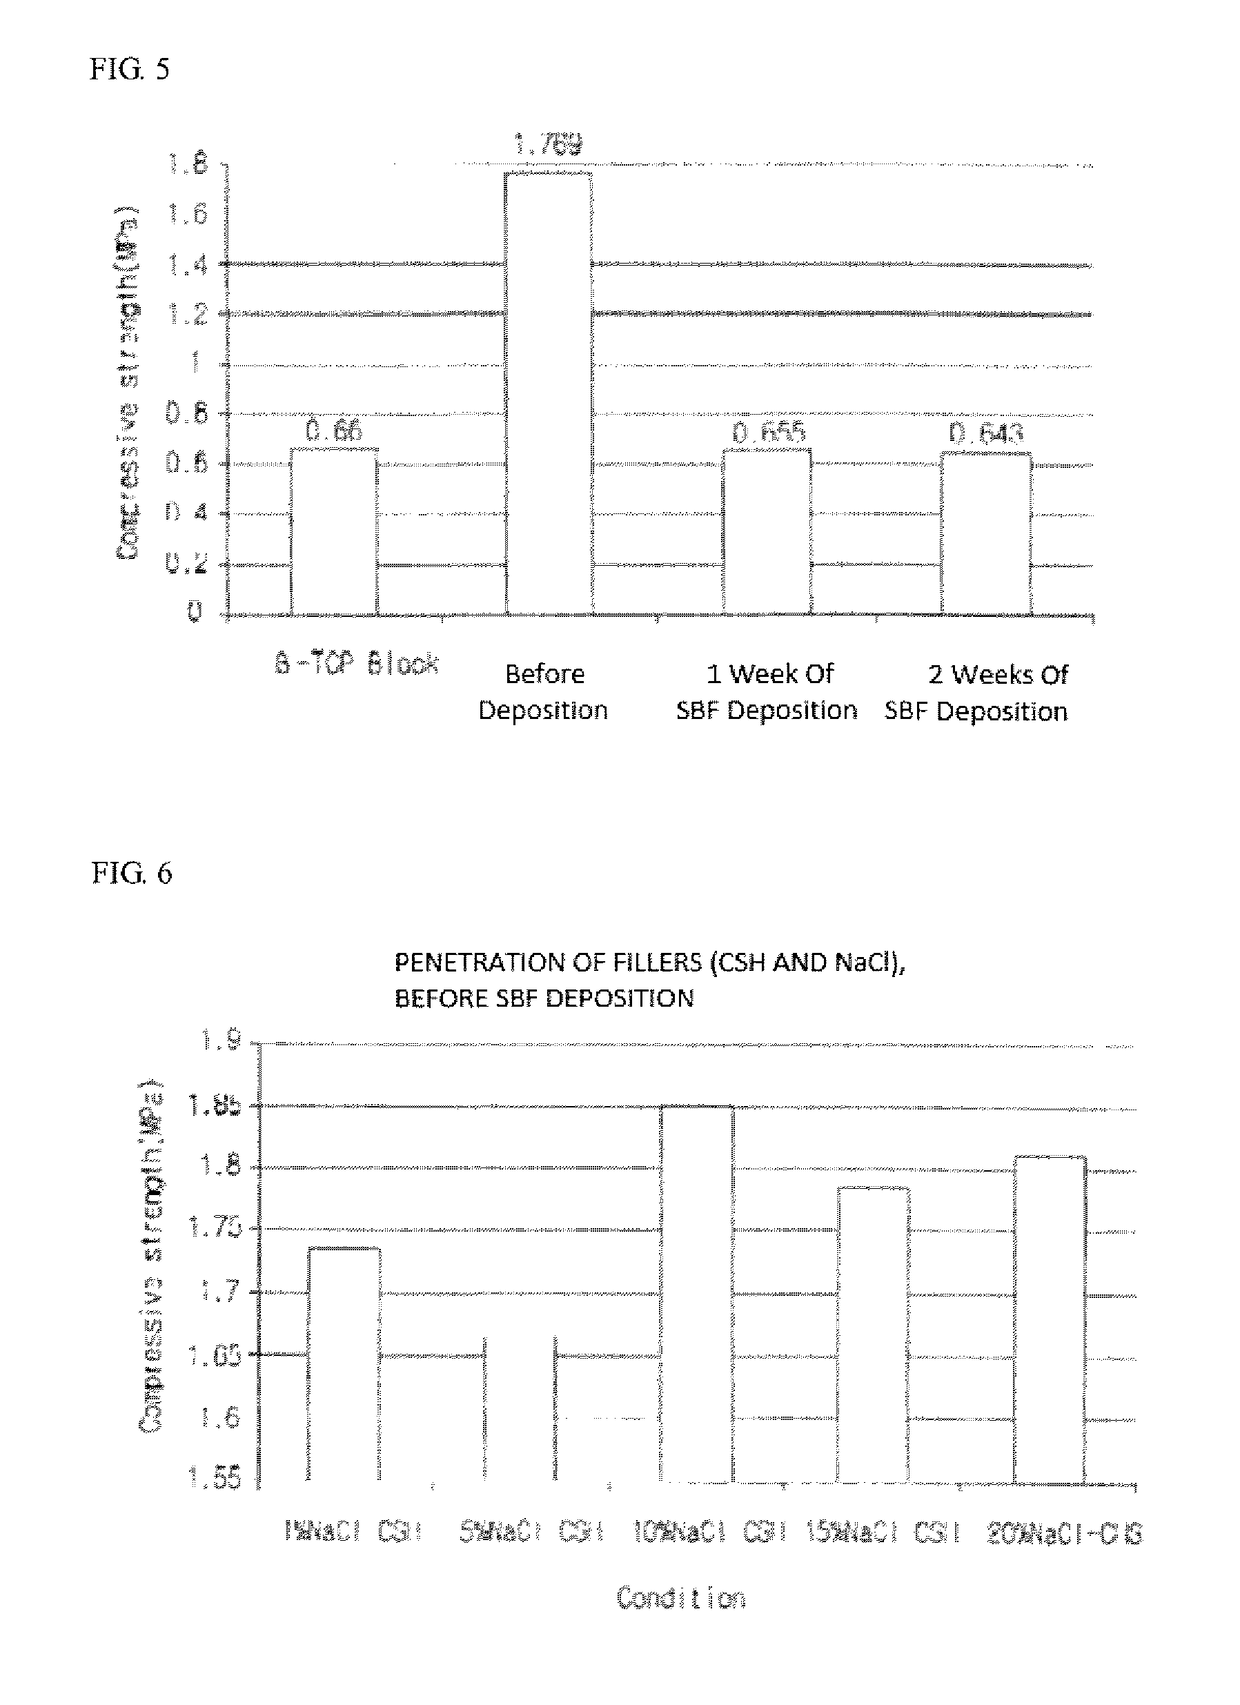 High strength synthetic bone for bone replacement for increasing ompressive strength and facilitating blood circulation, and manufacturing method therefor